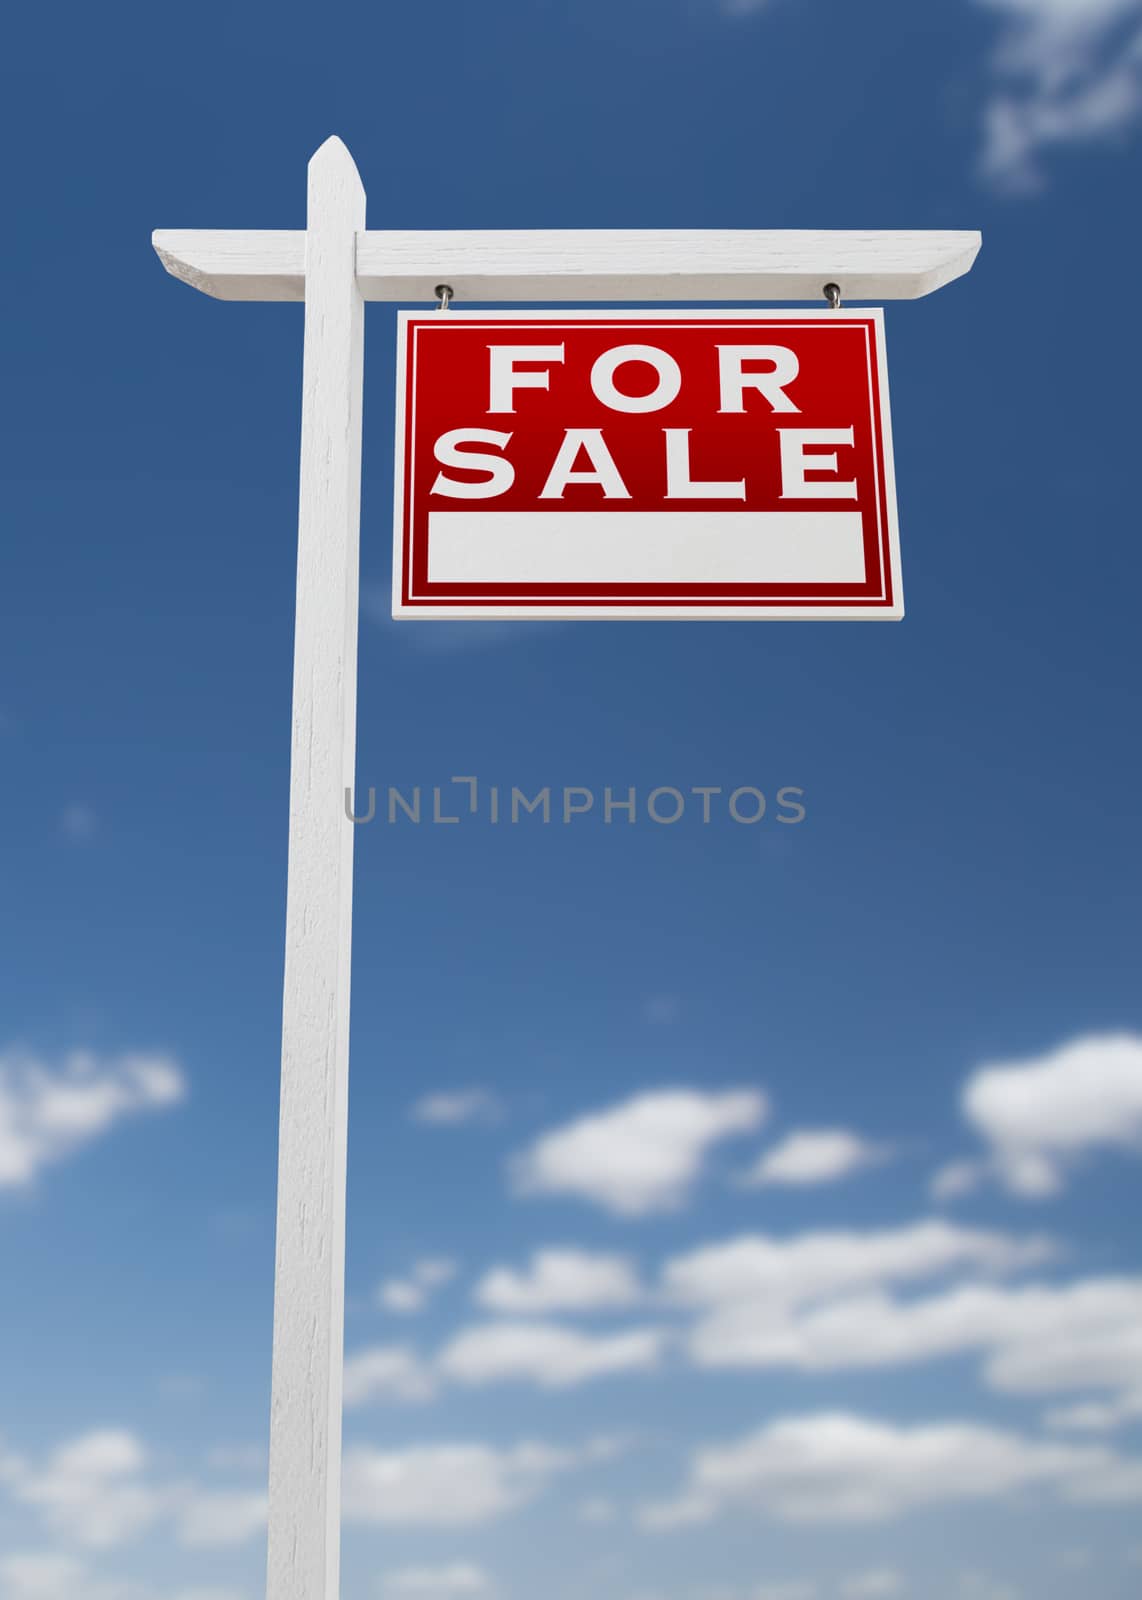 Right Facing For Sale Real Estate Sign on a Blue Sky with Clouds.